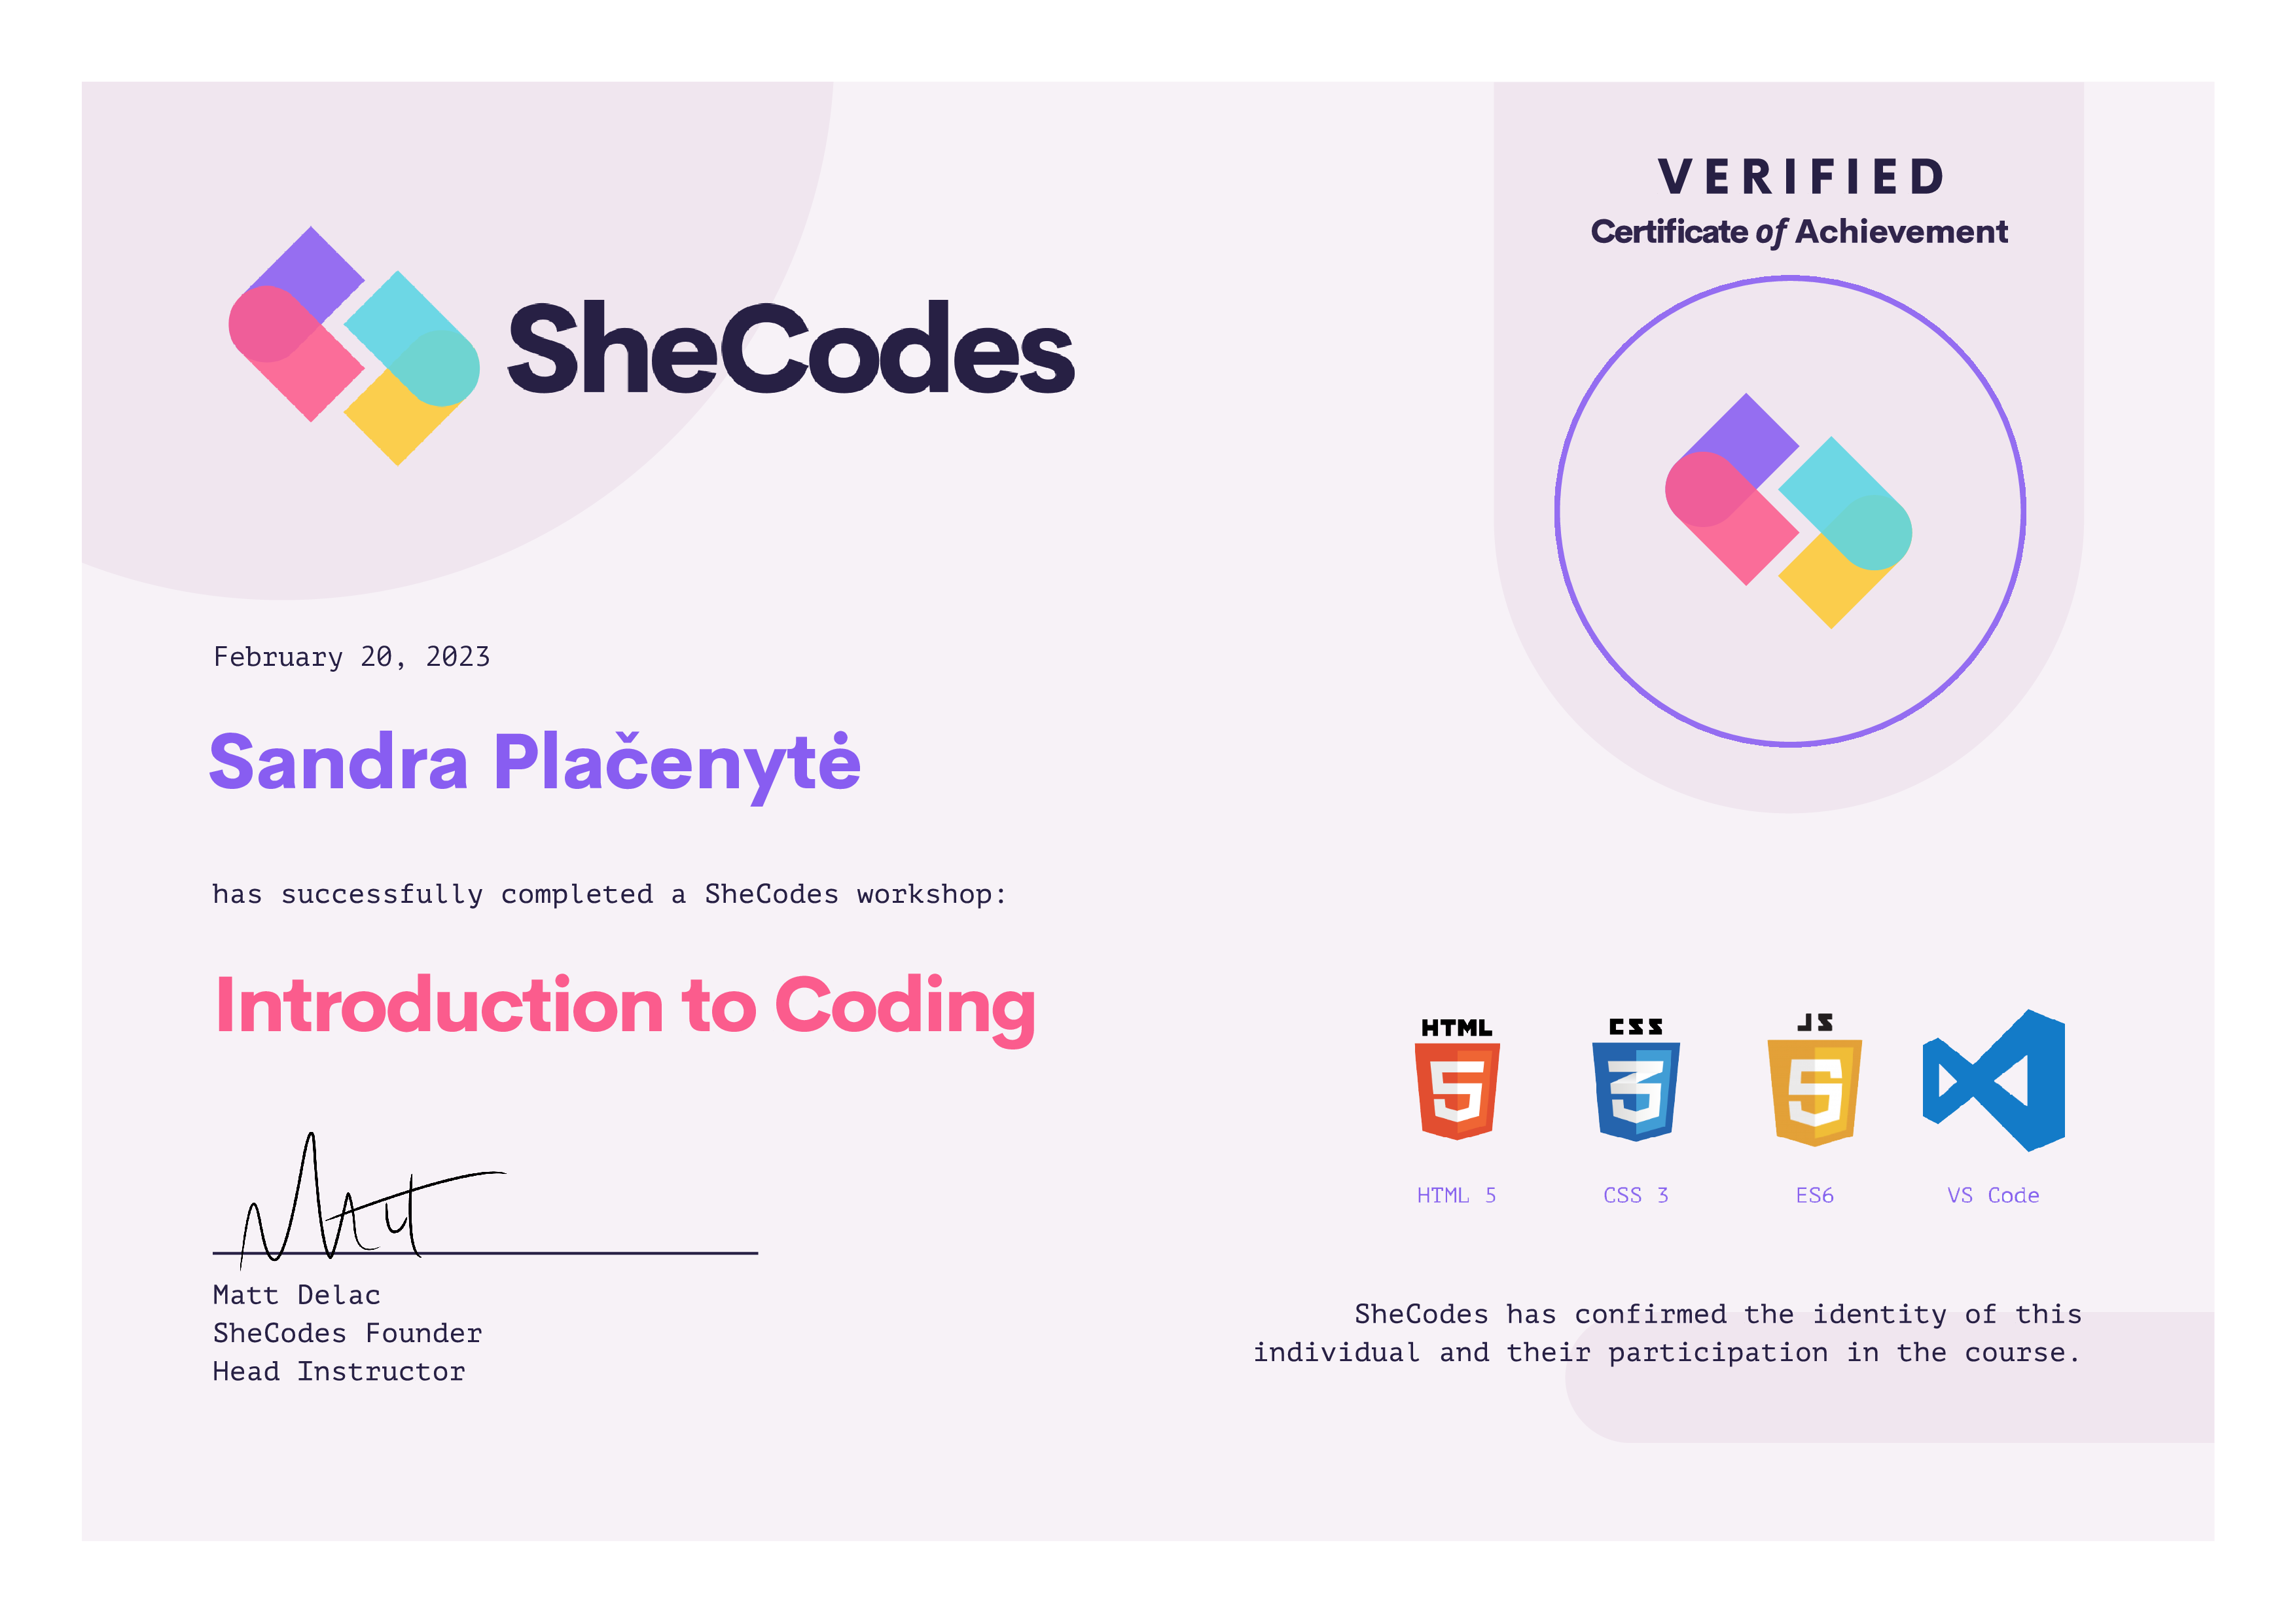 Sandra's certification to introduction to coding